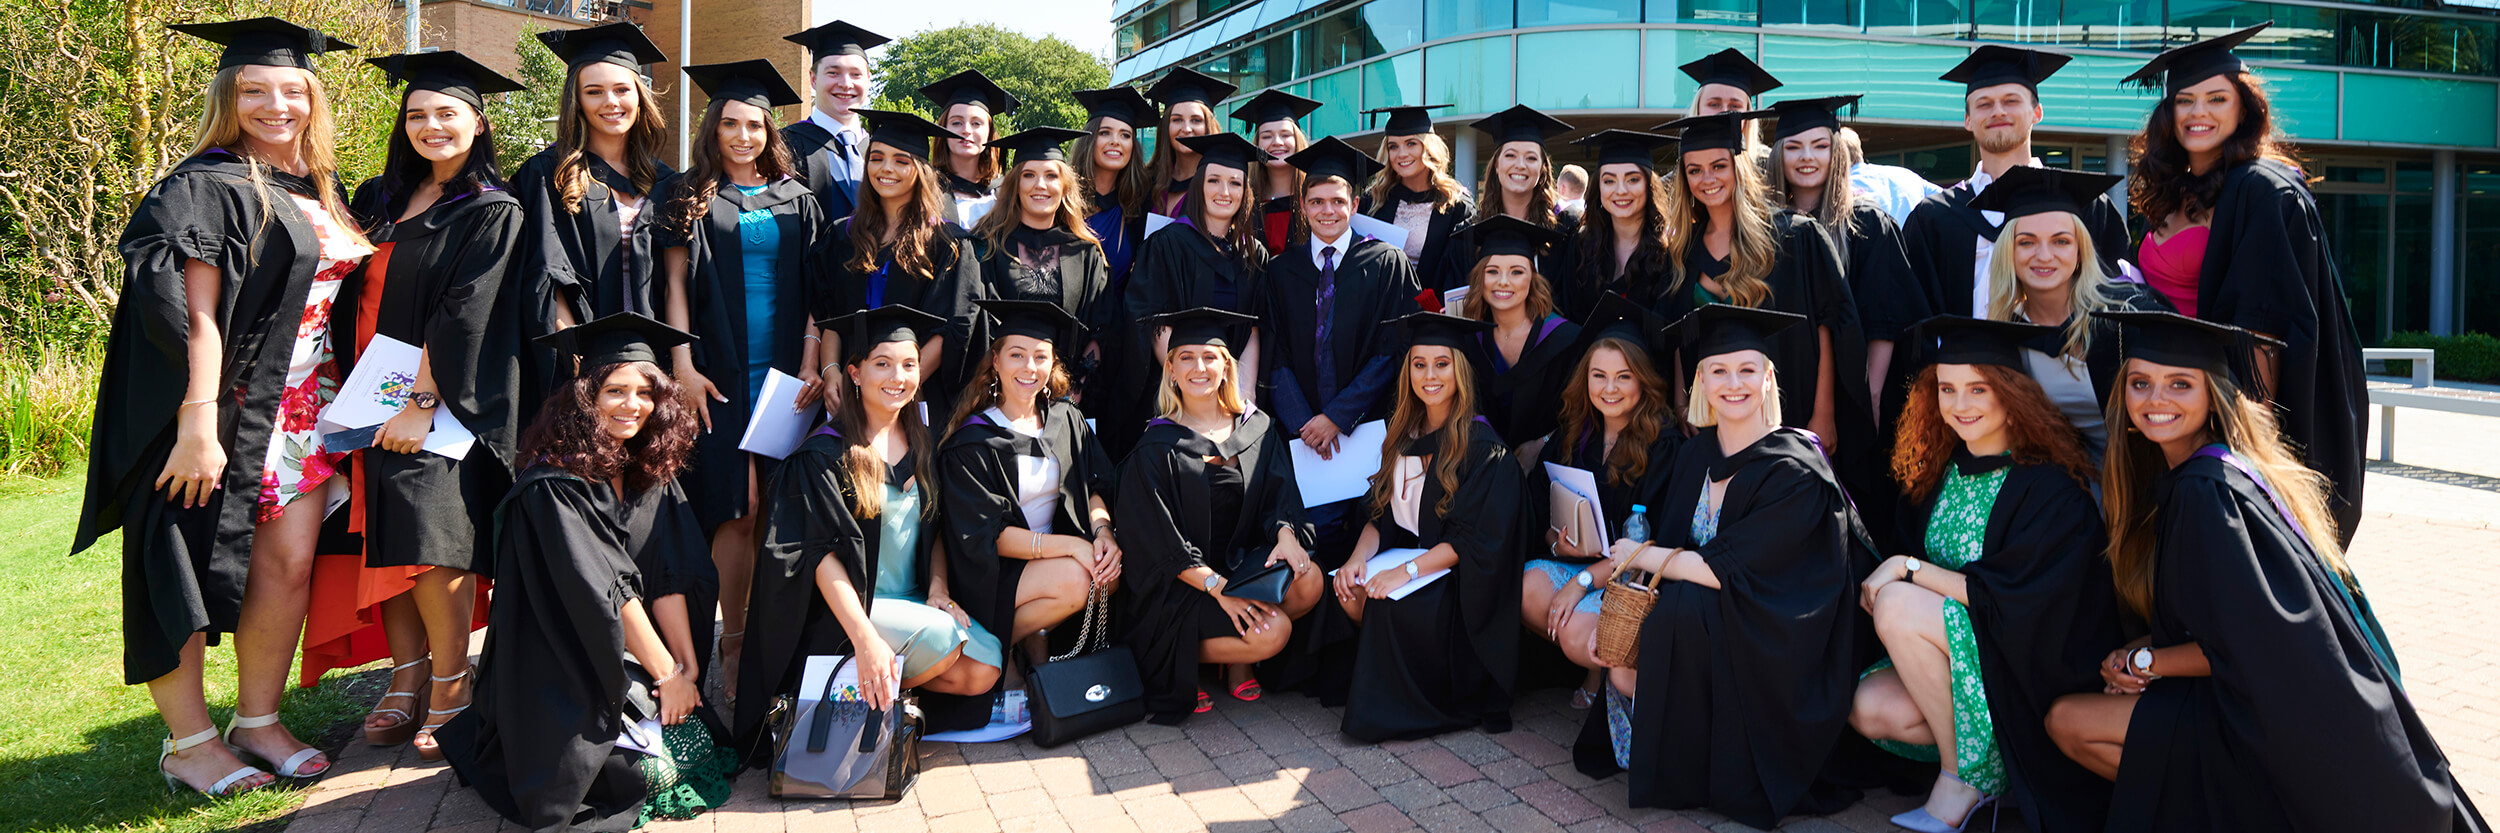 A large group of graduates pose for a photo together outside the Faculty of Health, Social Care and Medicine.